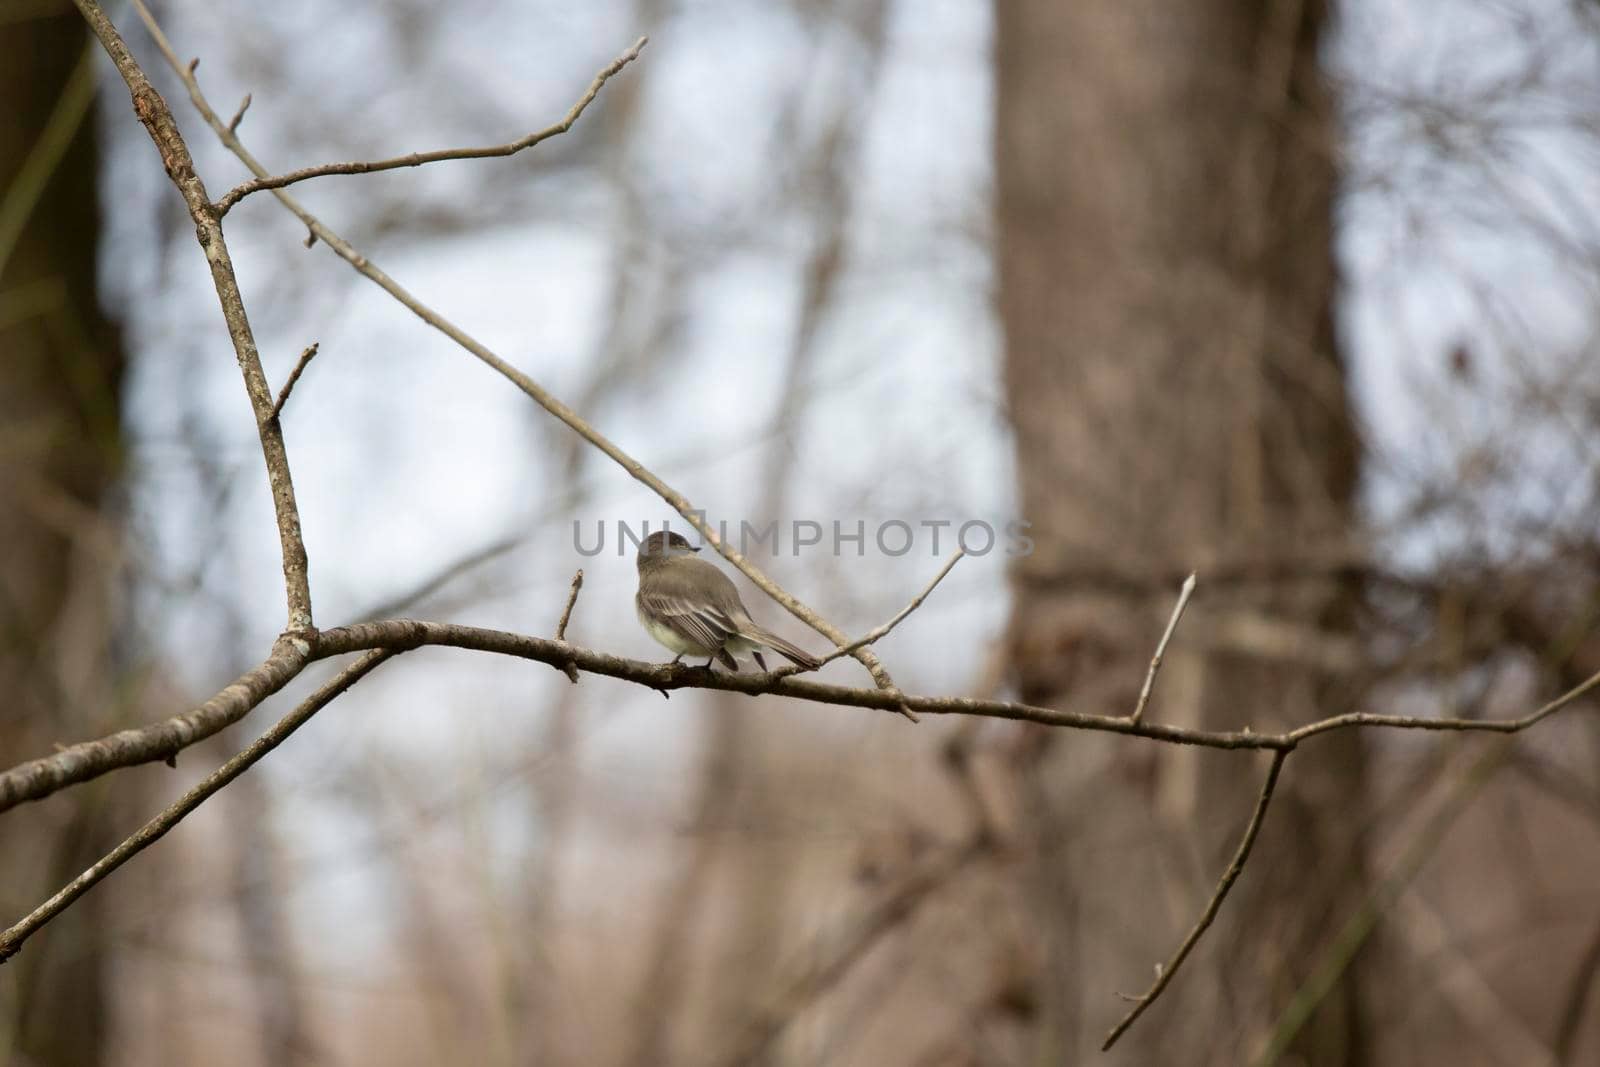 Curious eastern phoebe (Sayornis phoebe) tilting its head, looking around from a small branch